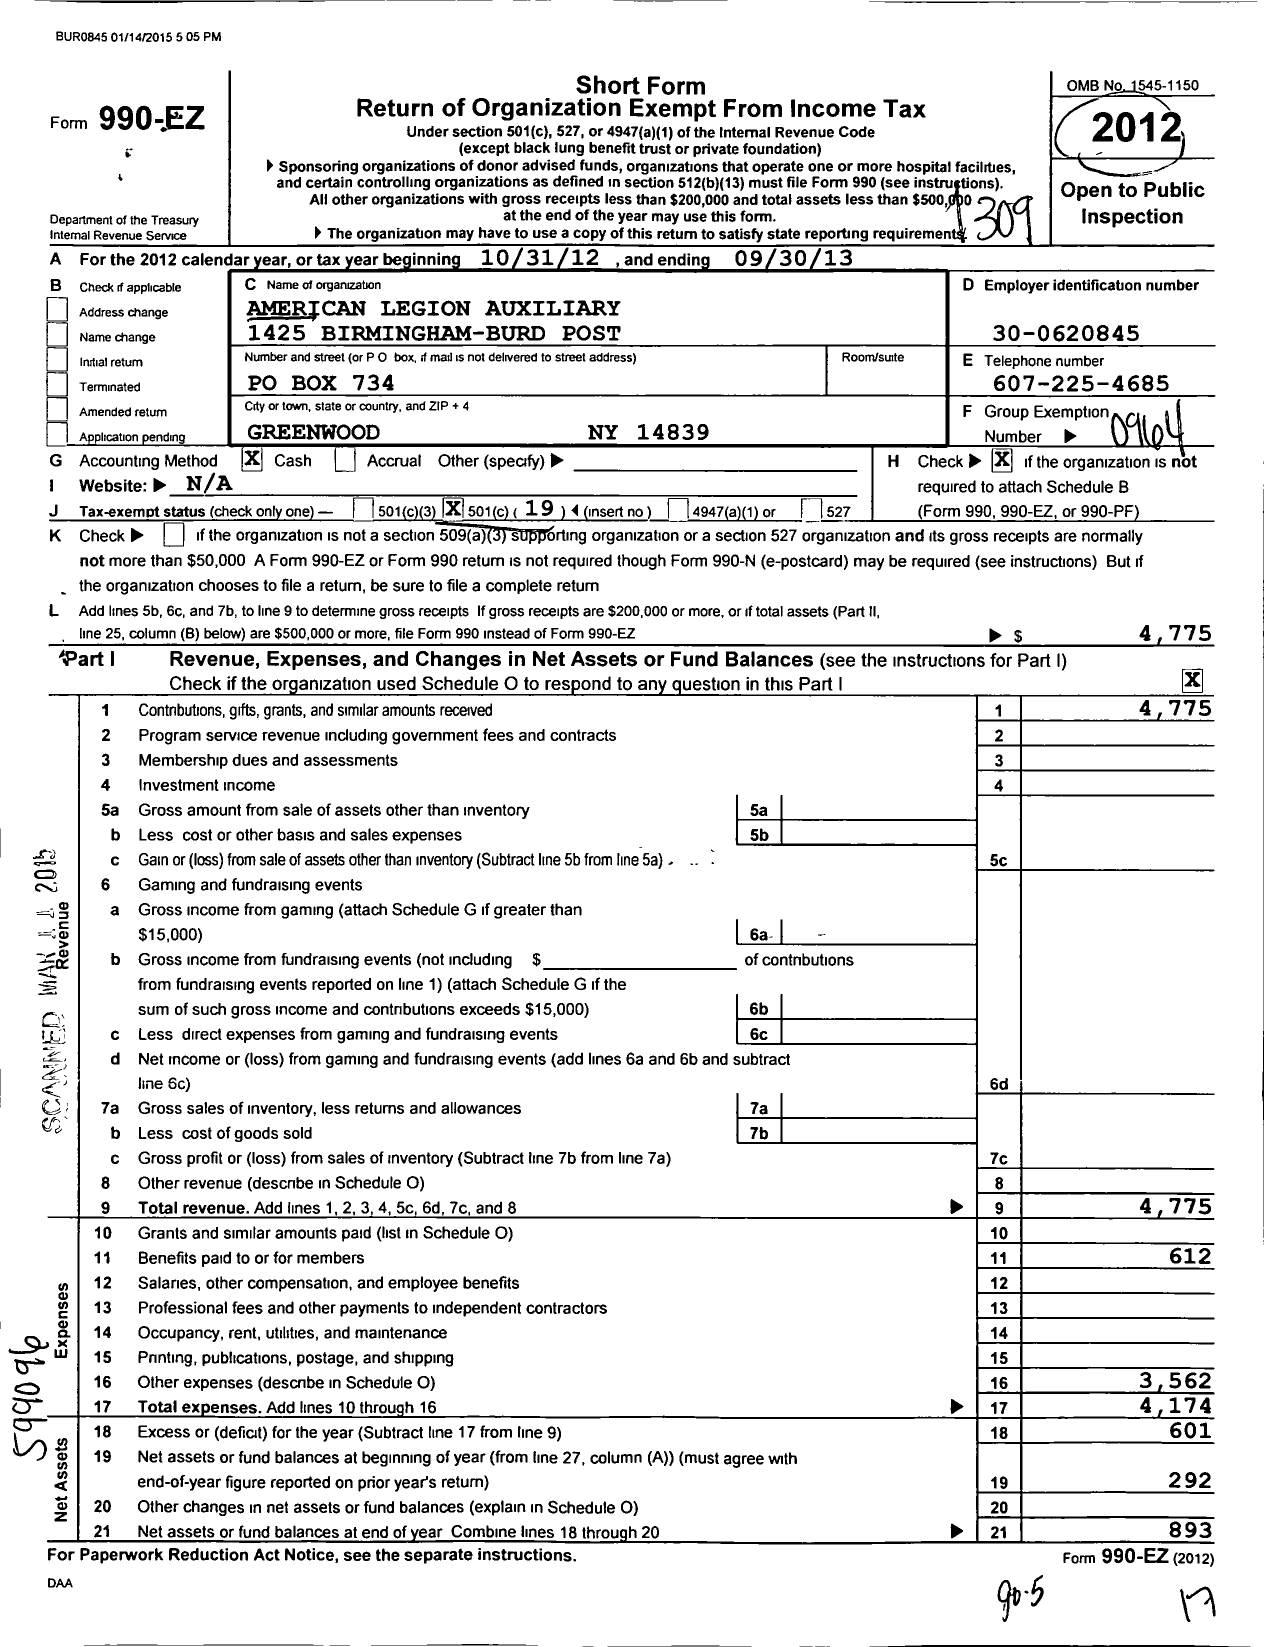 Image of first page of 2012 Form 990EO for American Legion Auxiliary - 1425 Birmingham-Burd